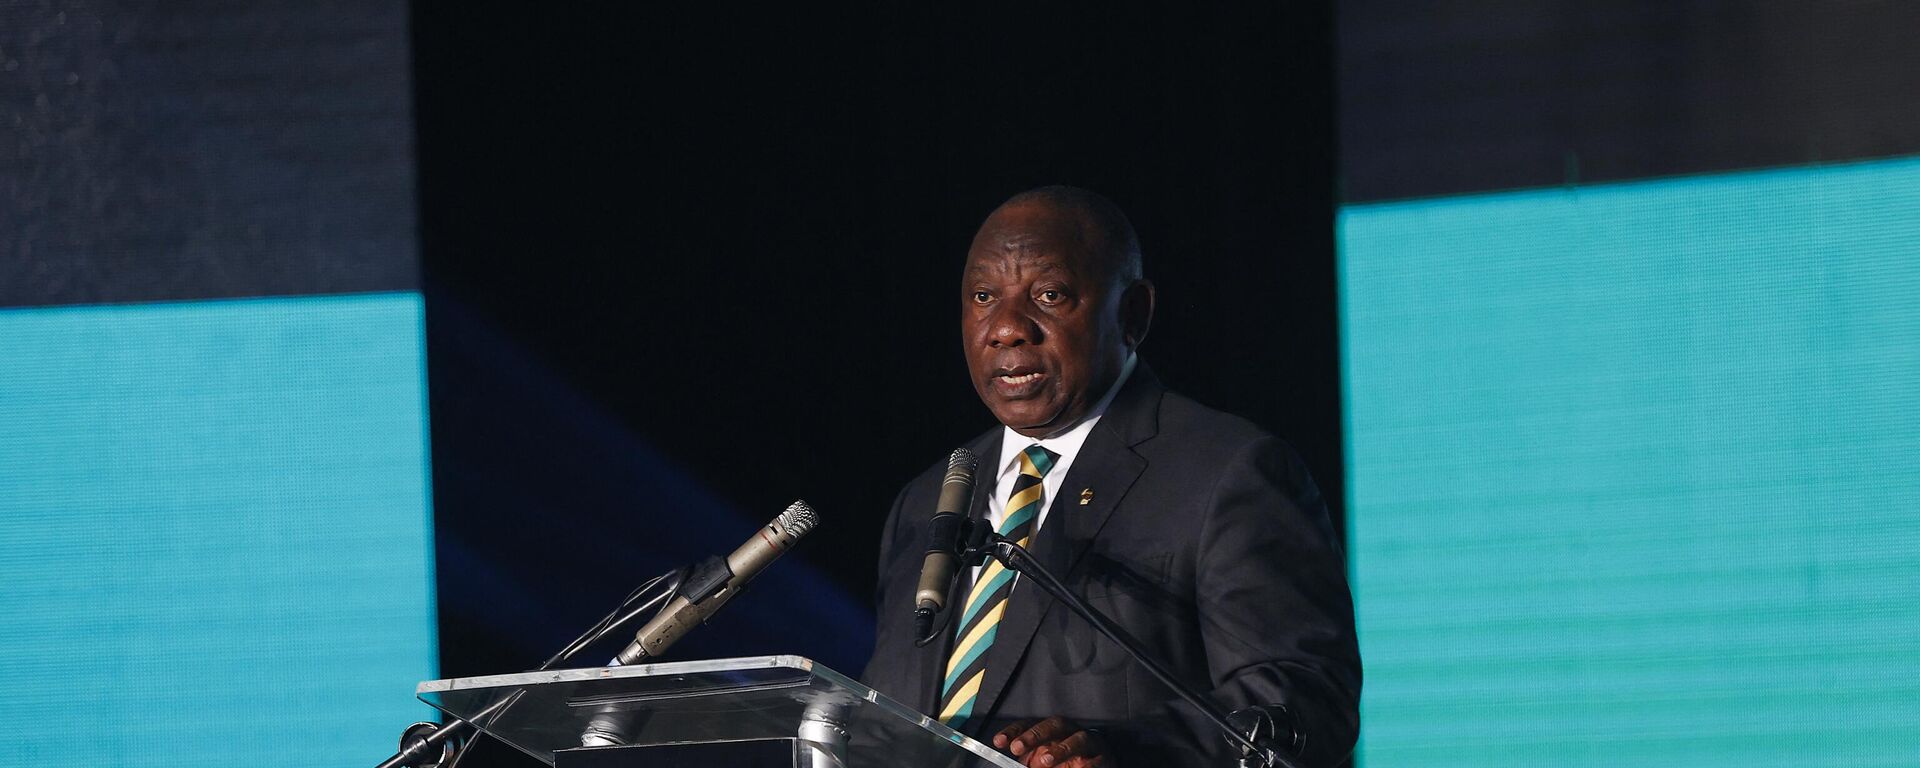 South African President and leader of the ruling African National Congress (ANC) Cyril Ramaphosa delivers a keynote address during the during 111th Anniversary gala dinner celebration at the Imvelo Safari in Bloemfontein on January 7, 2023. - Sputnik International, 1920, 09.01.2023